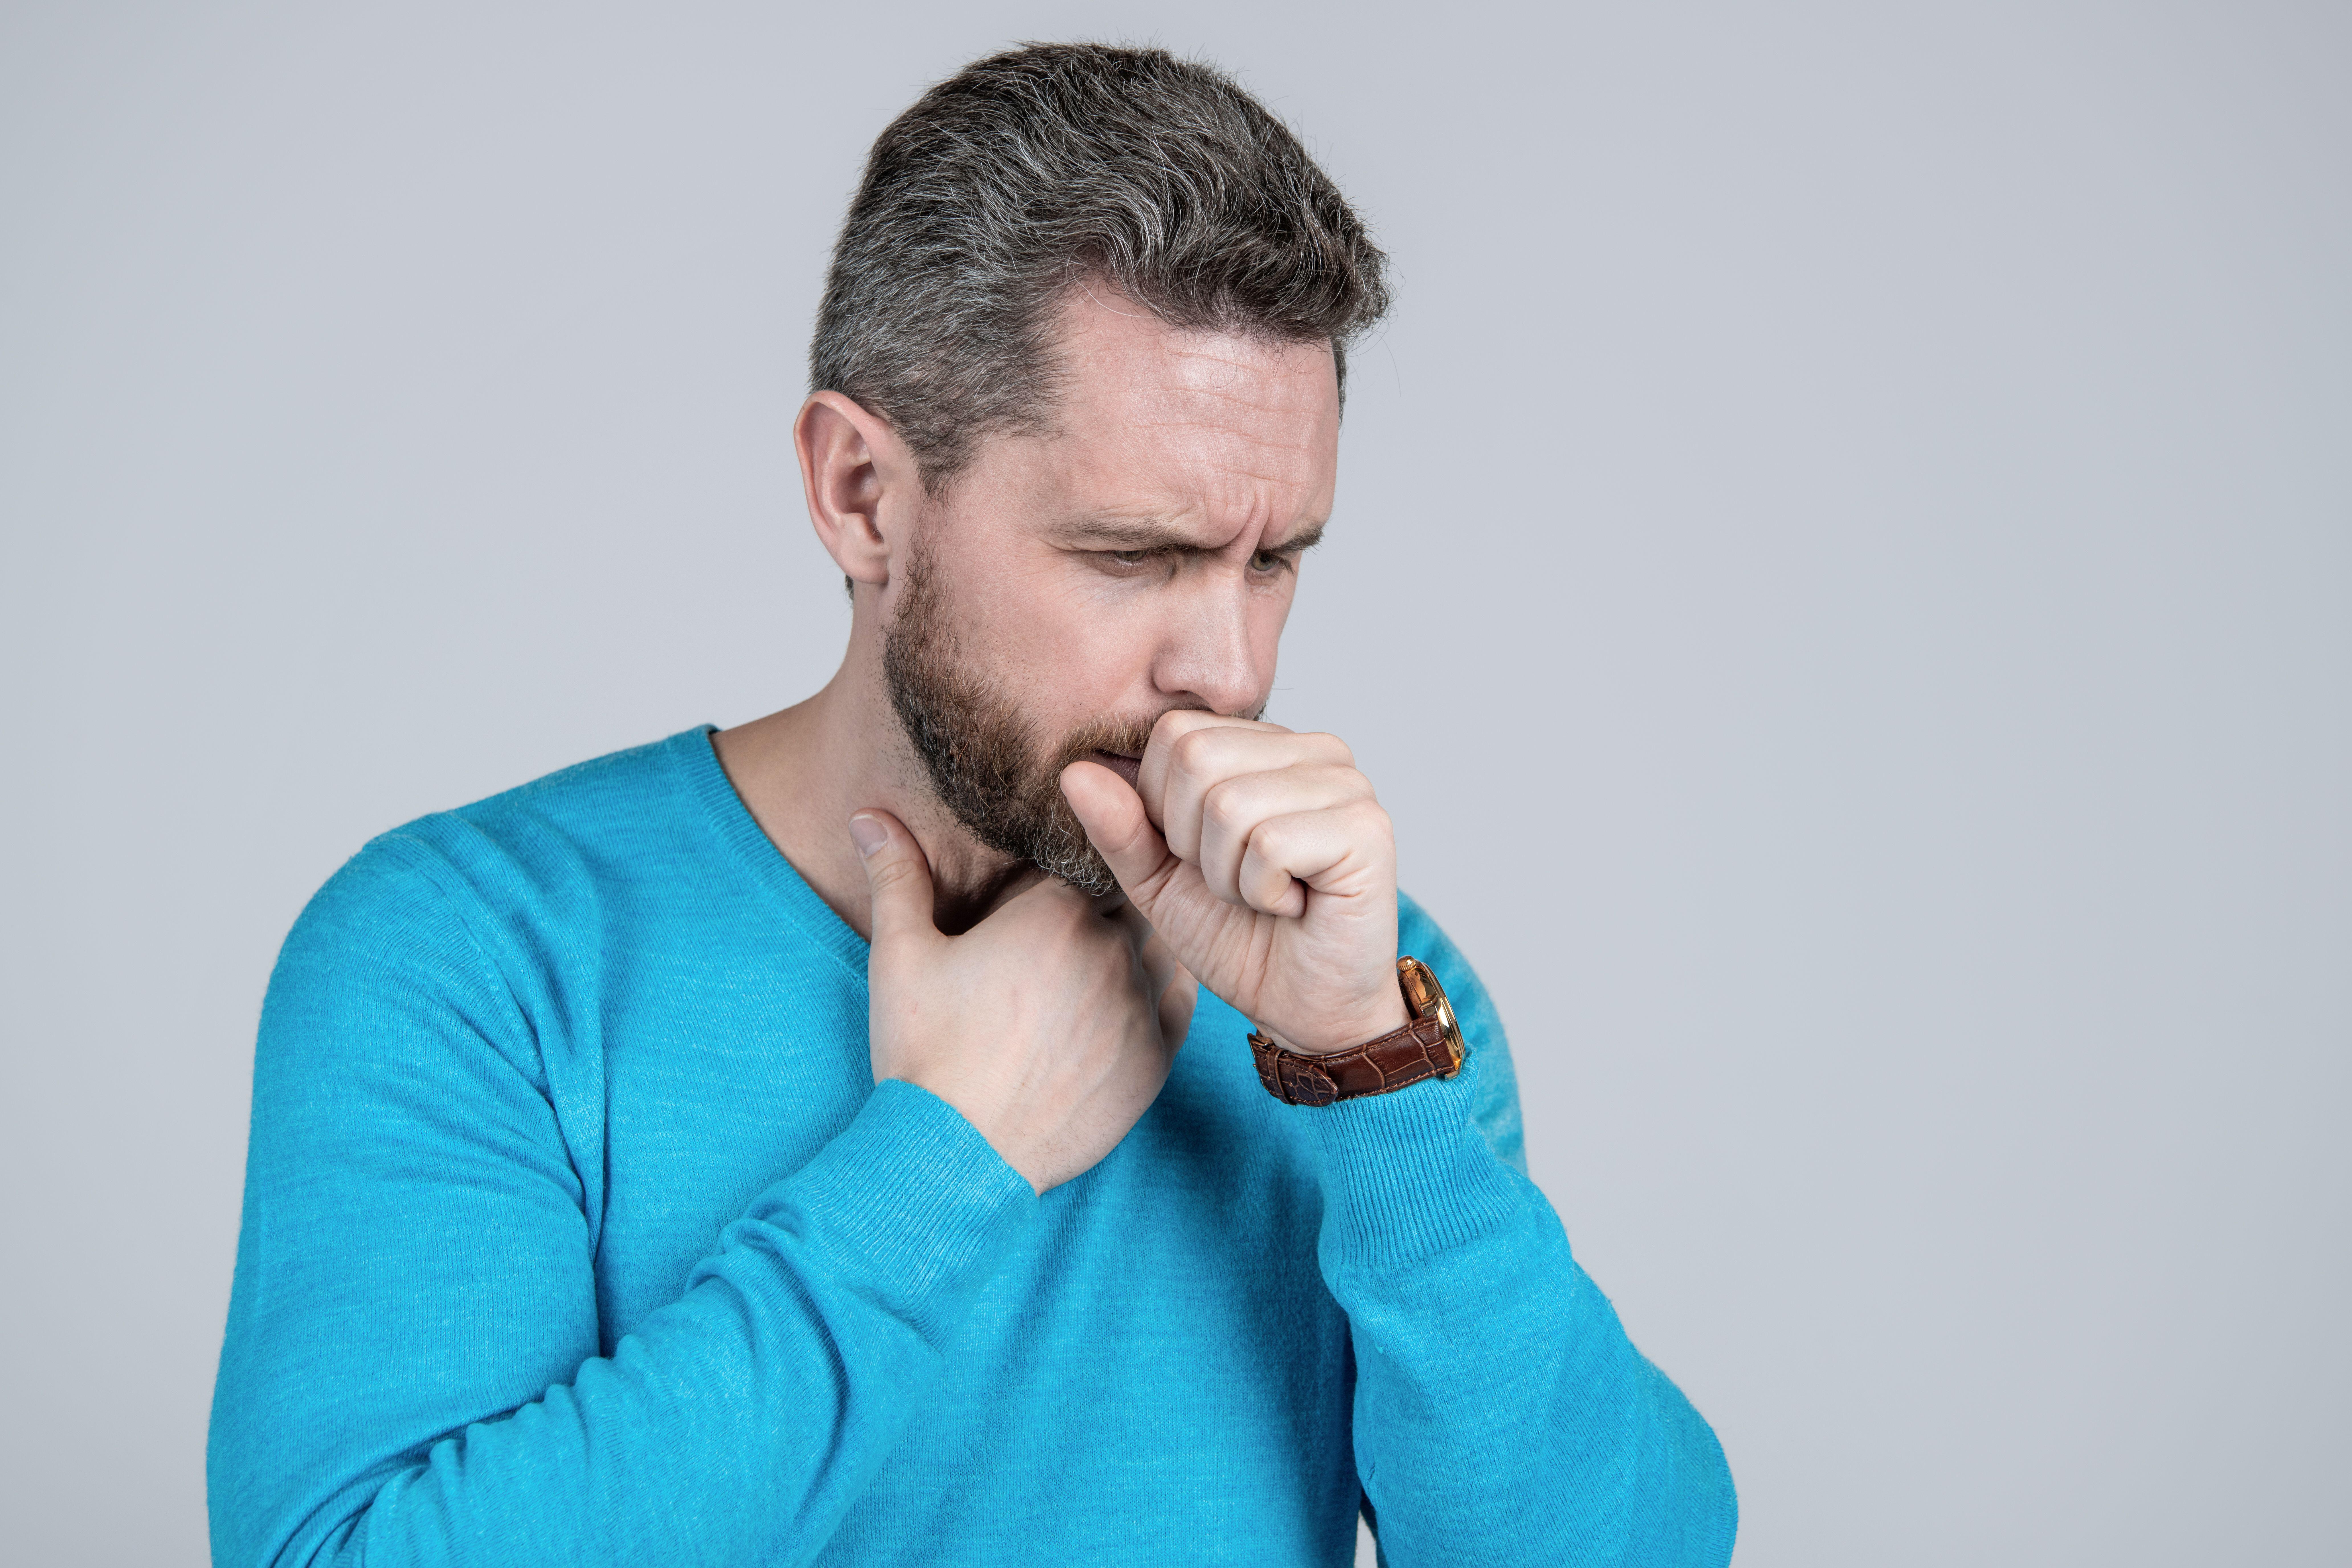 A man coughing